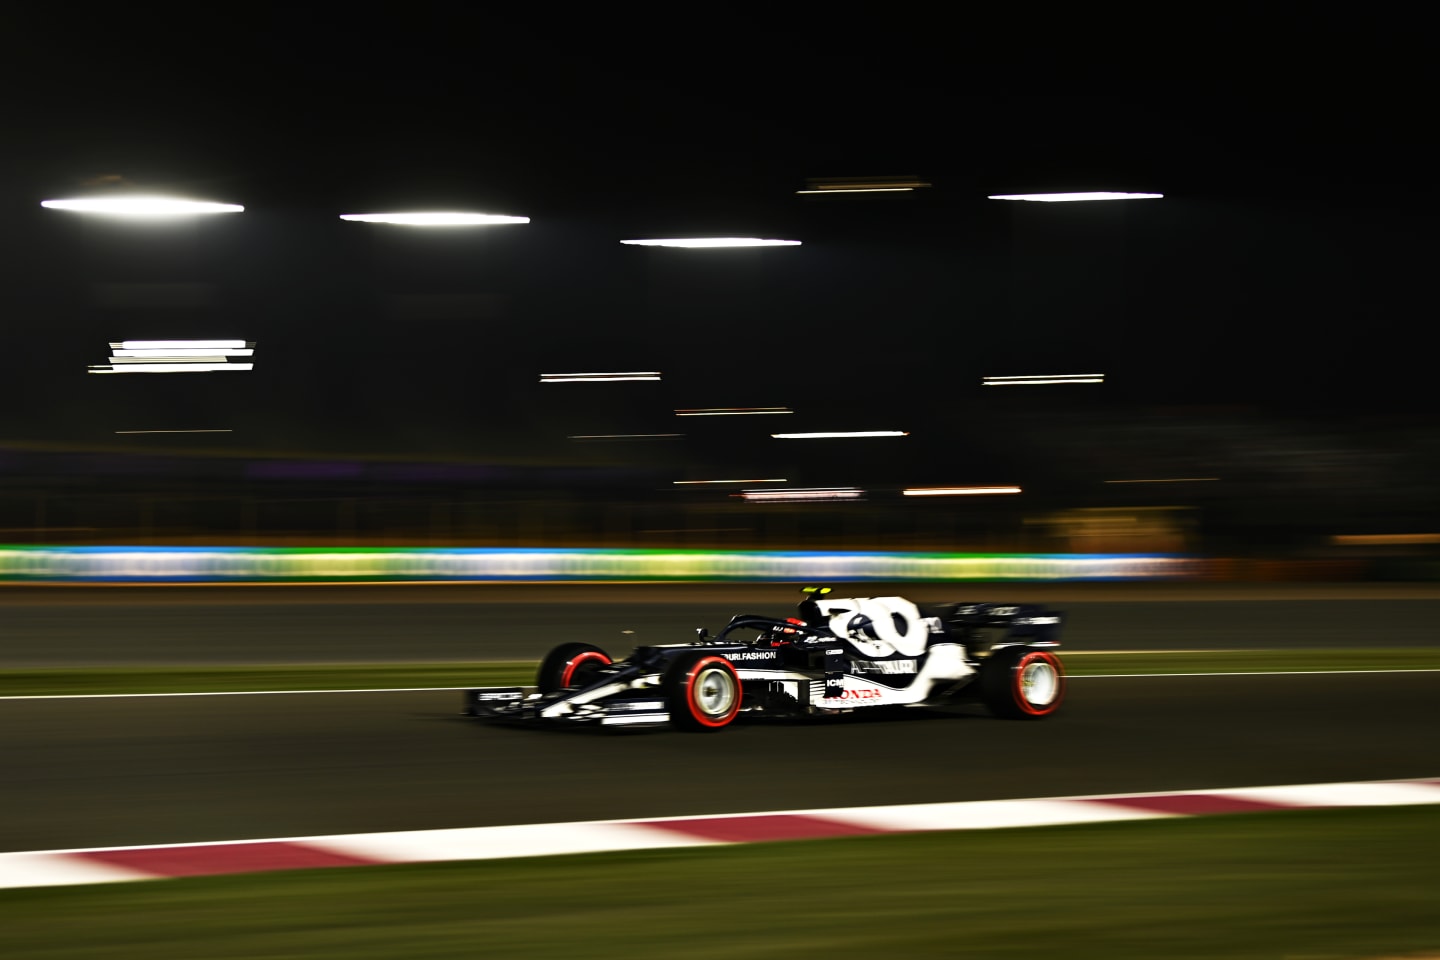 DOHA, QATAR - NOVEMBER 20: Pierre Gasly of France driving the (10) Scuderia AlphaTauri AT02 Honda during qualifying ahead of the F1 Grand Prix of Qatar at Losail International Circuit on November 20, 2021 in Doha, Qatar. (Photo by Clive Mason/Getty Images)